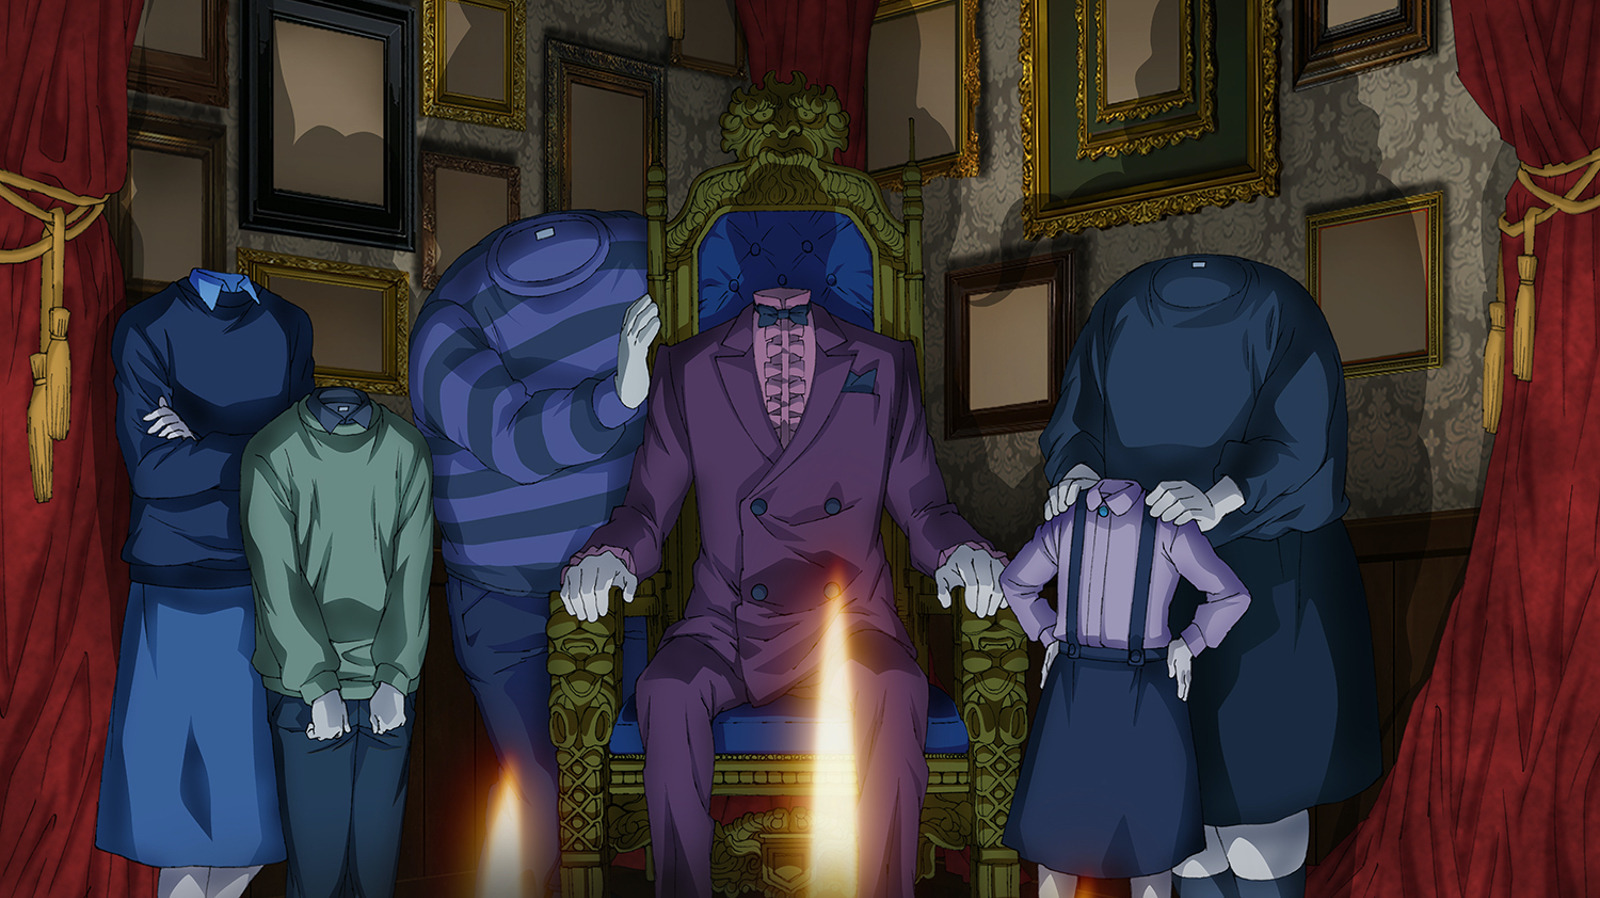 Ito Junji: Collection Episode 10 Discussion - Forums 